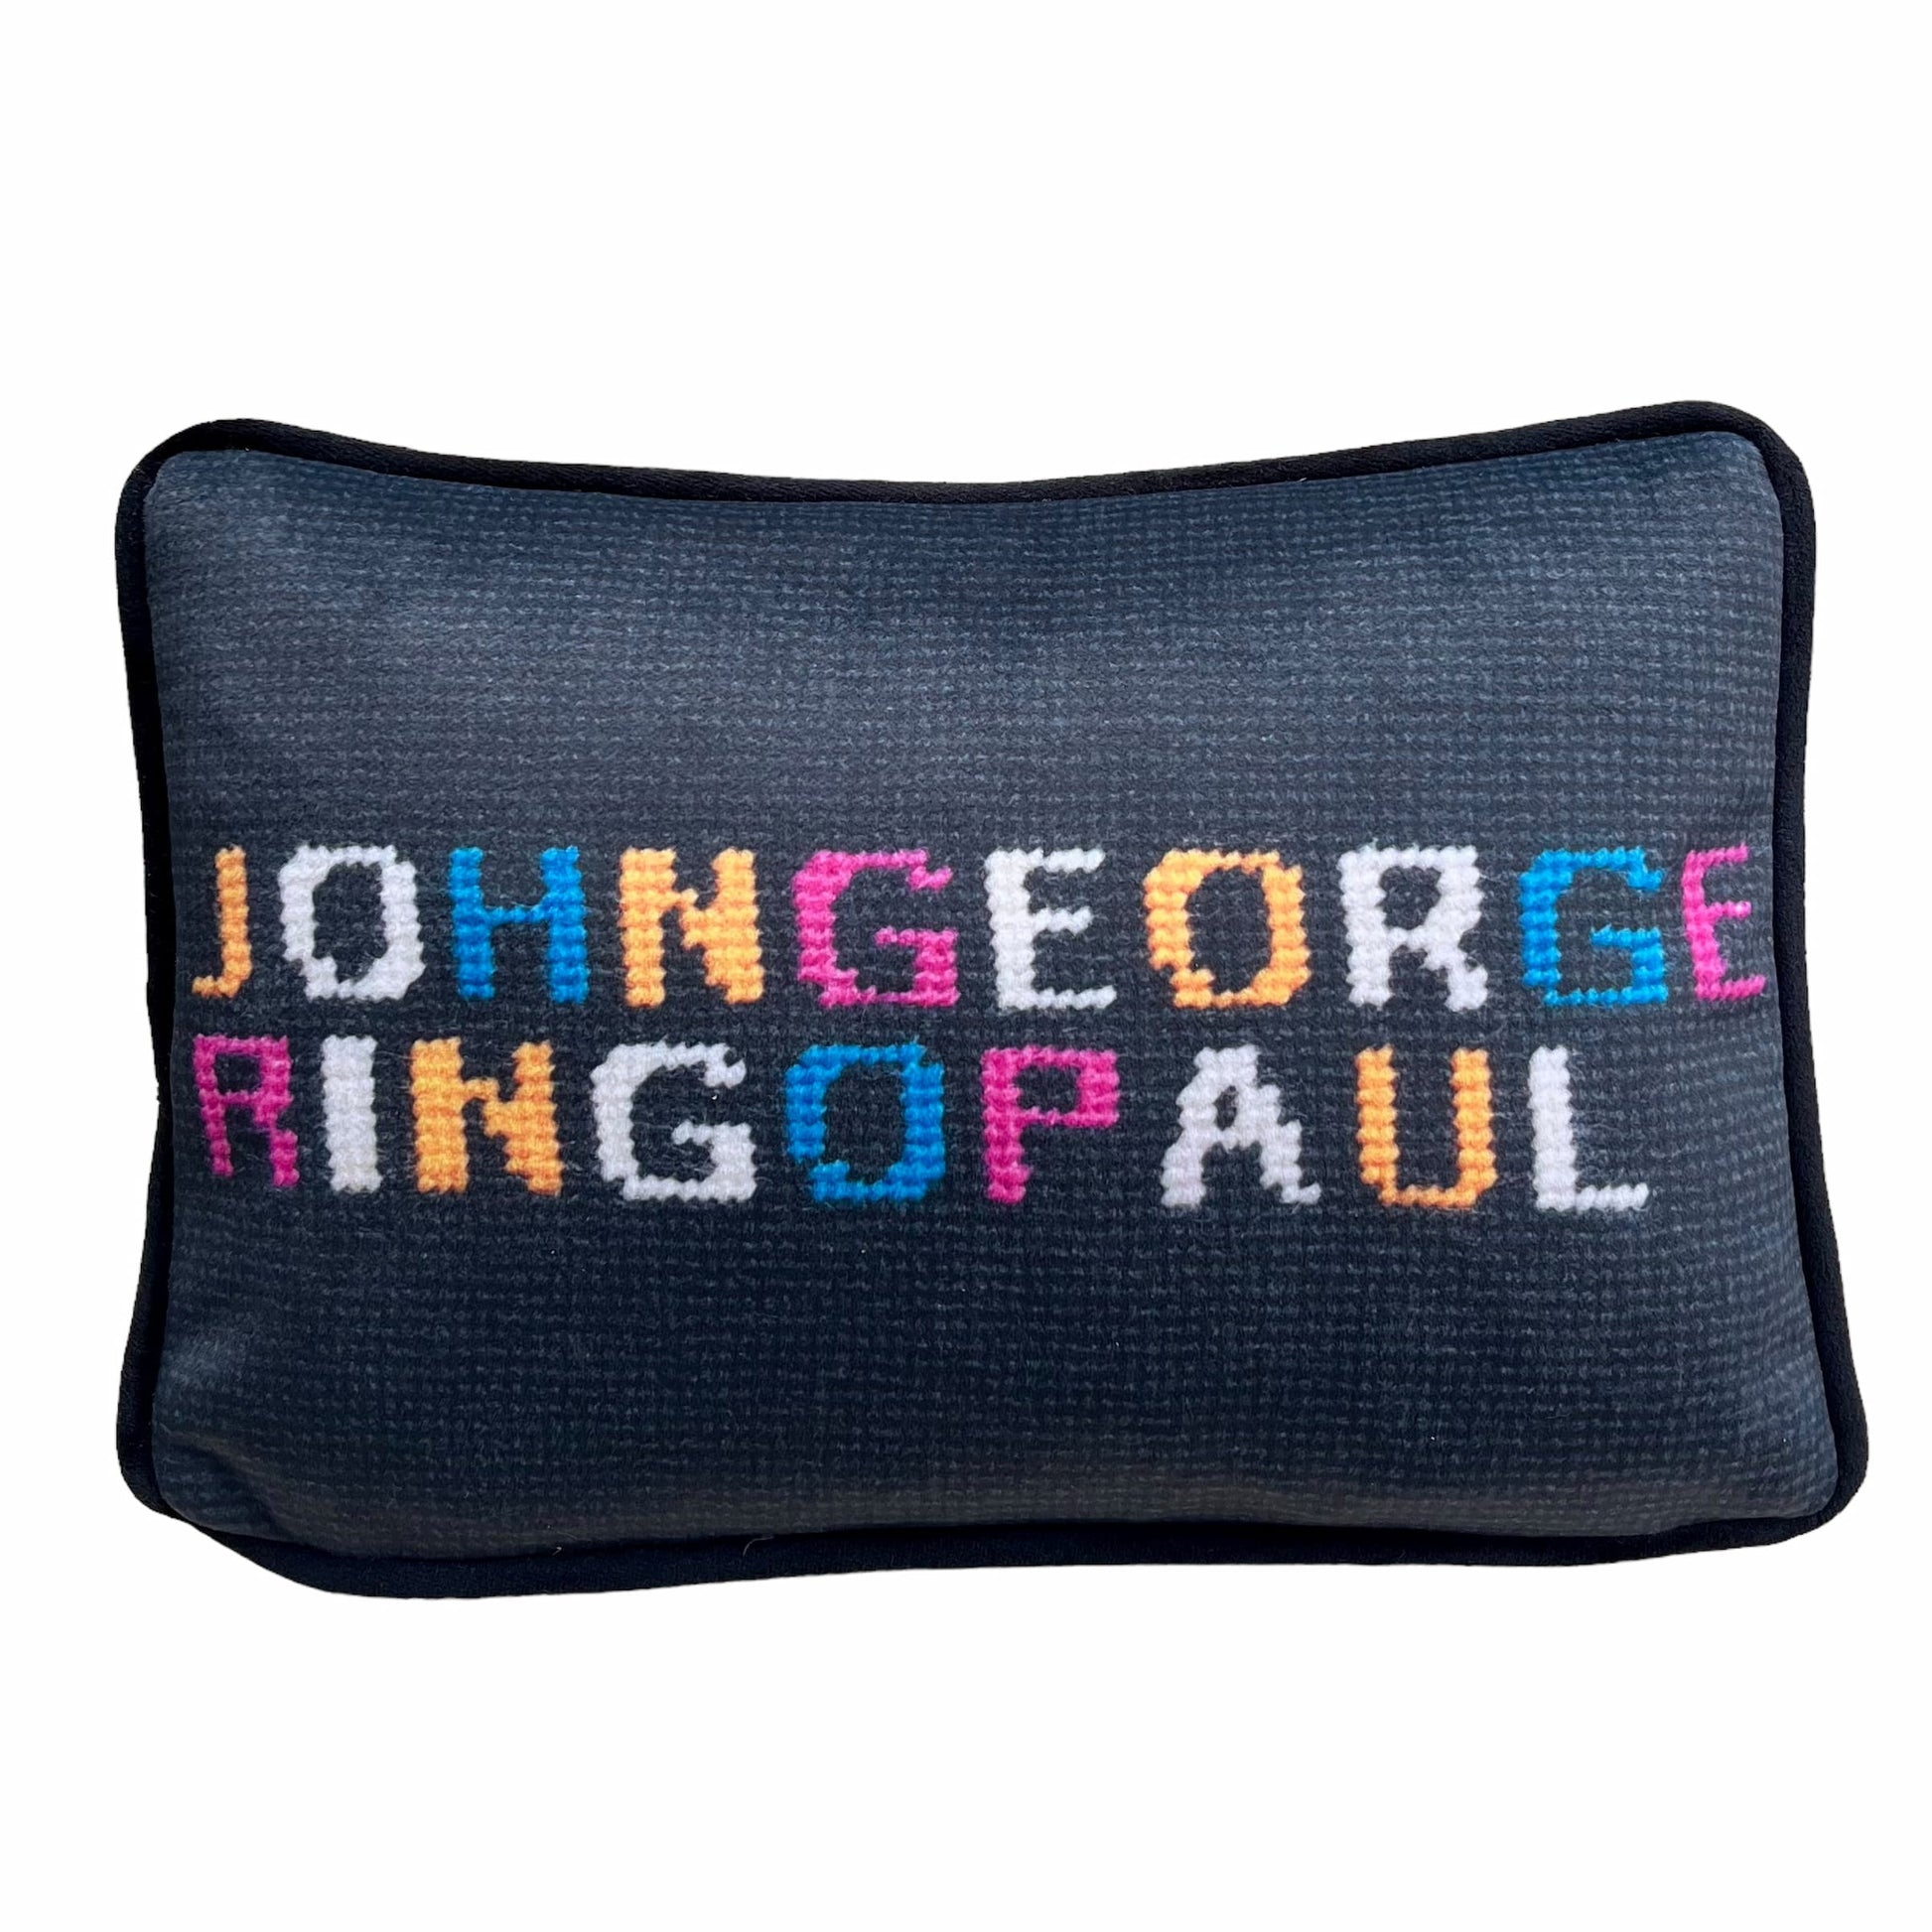 JOHNGEORGE on top line; RINGOPAUL written in colorful yellow, white, blue and pink letters on solid black background. The Beatles pillow.